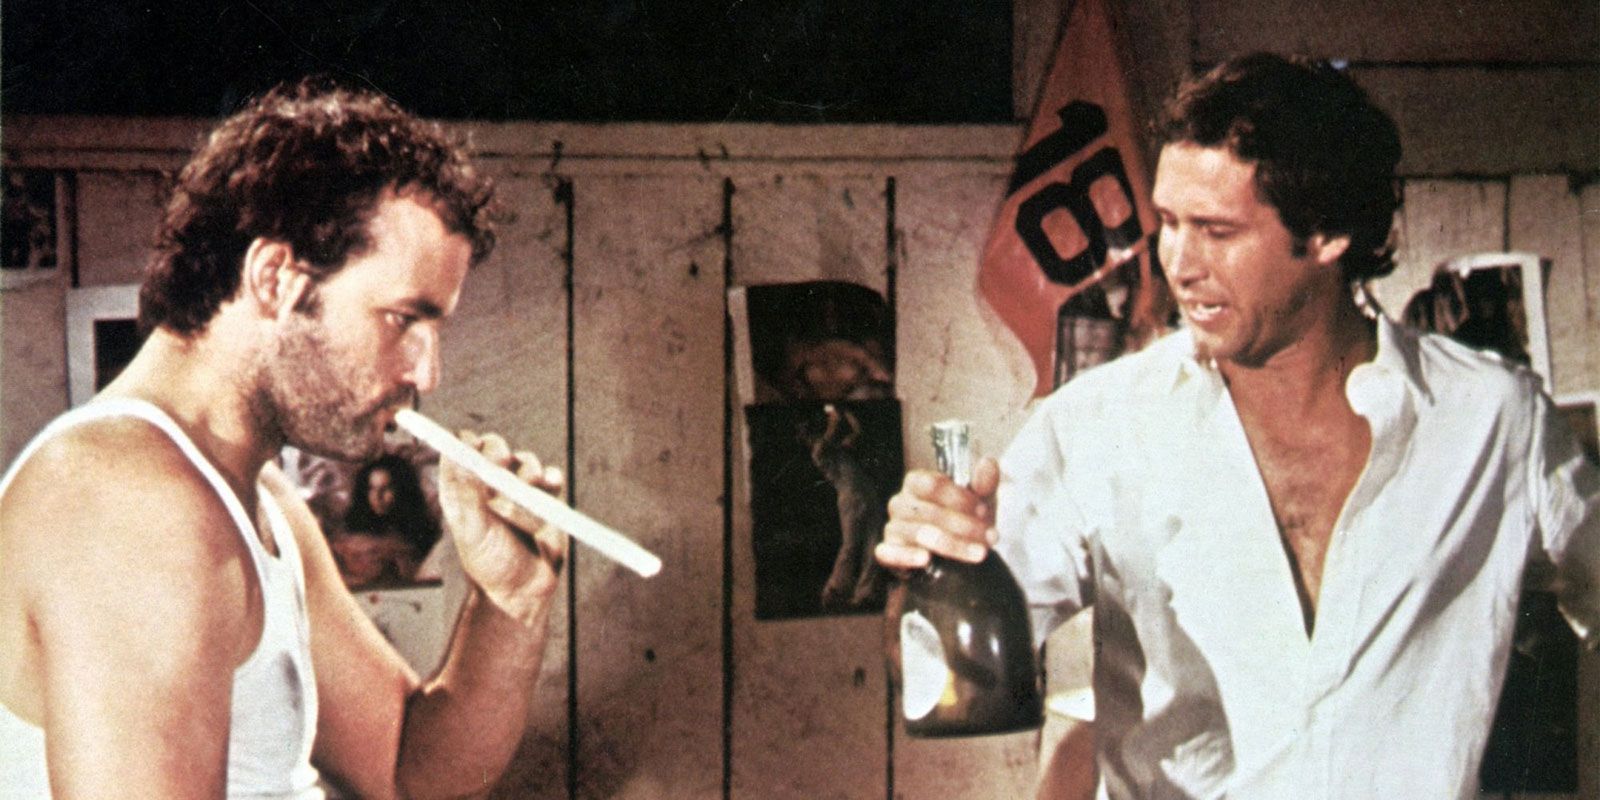 Bill Murray and Chevy Chase holding an alcohol bottle in Caddyshack